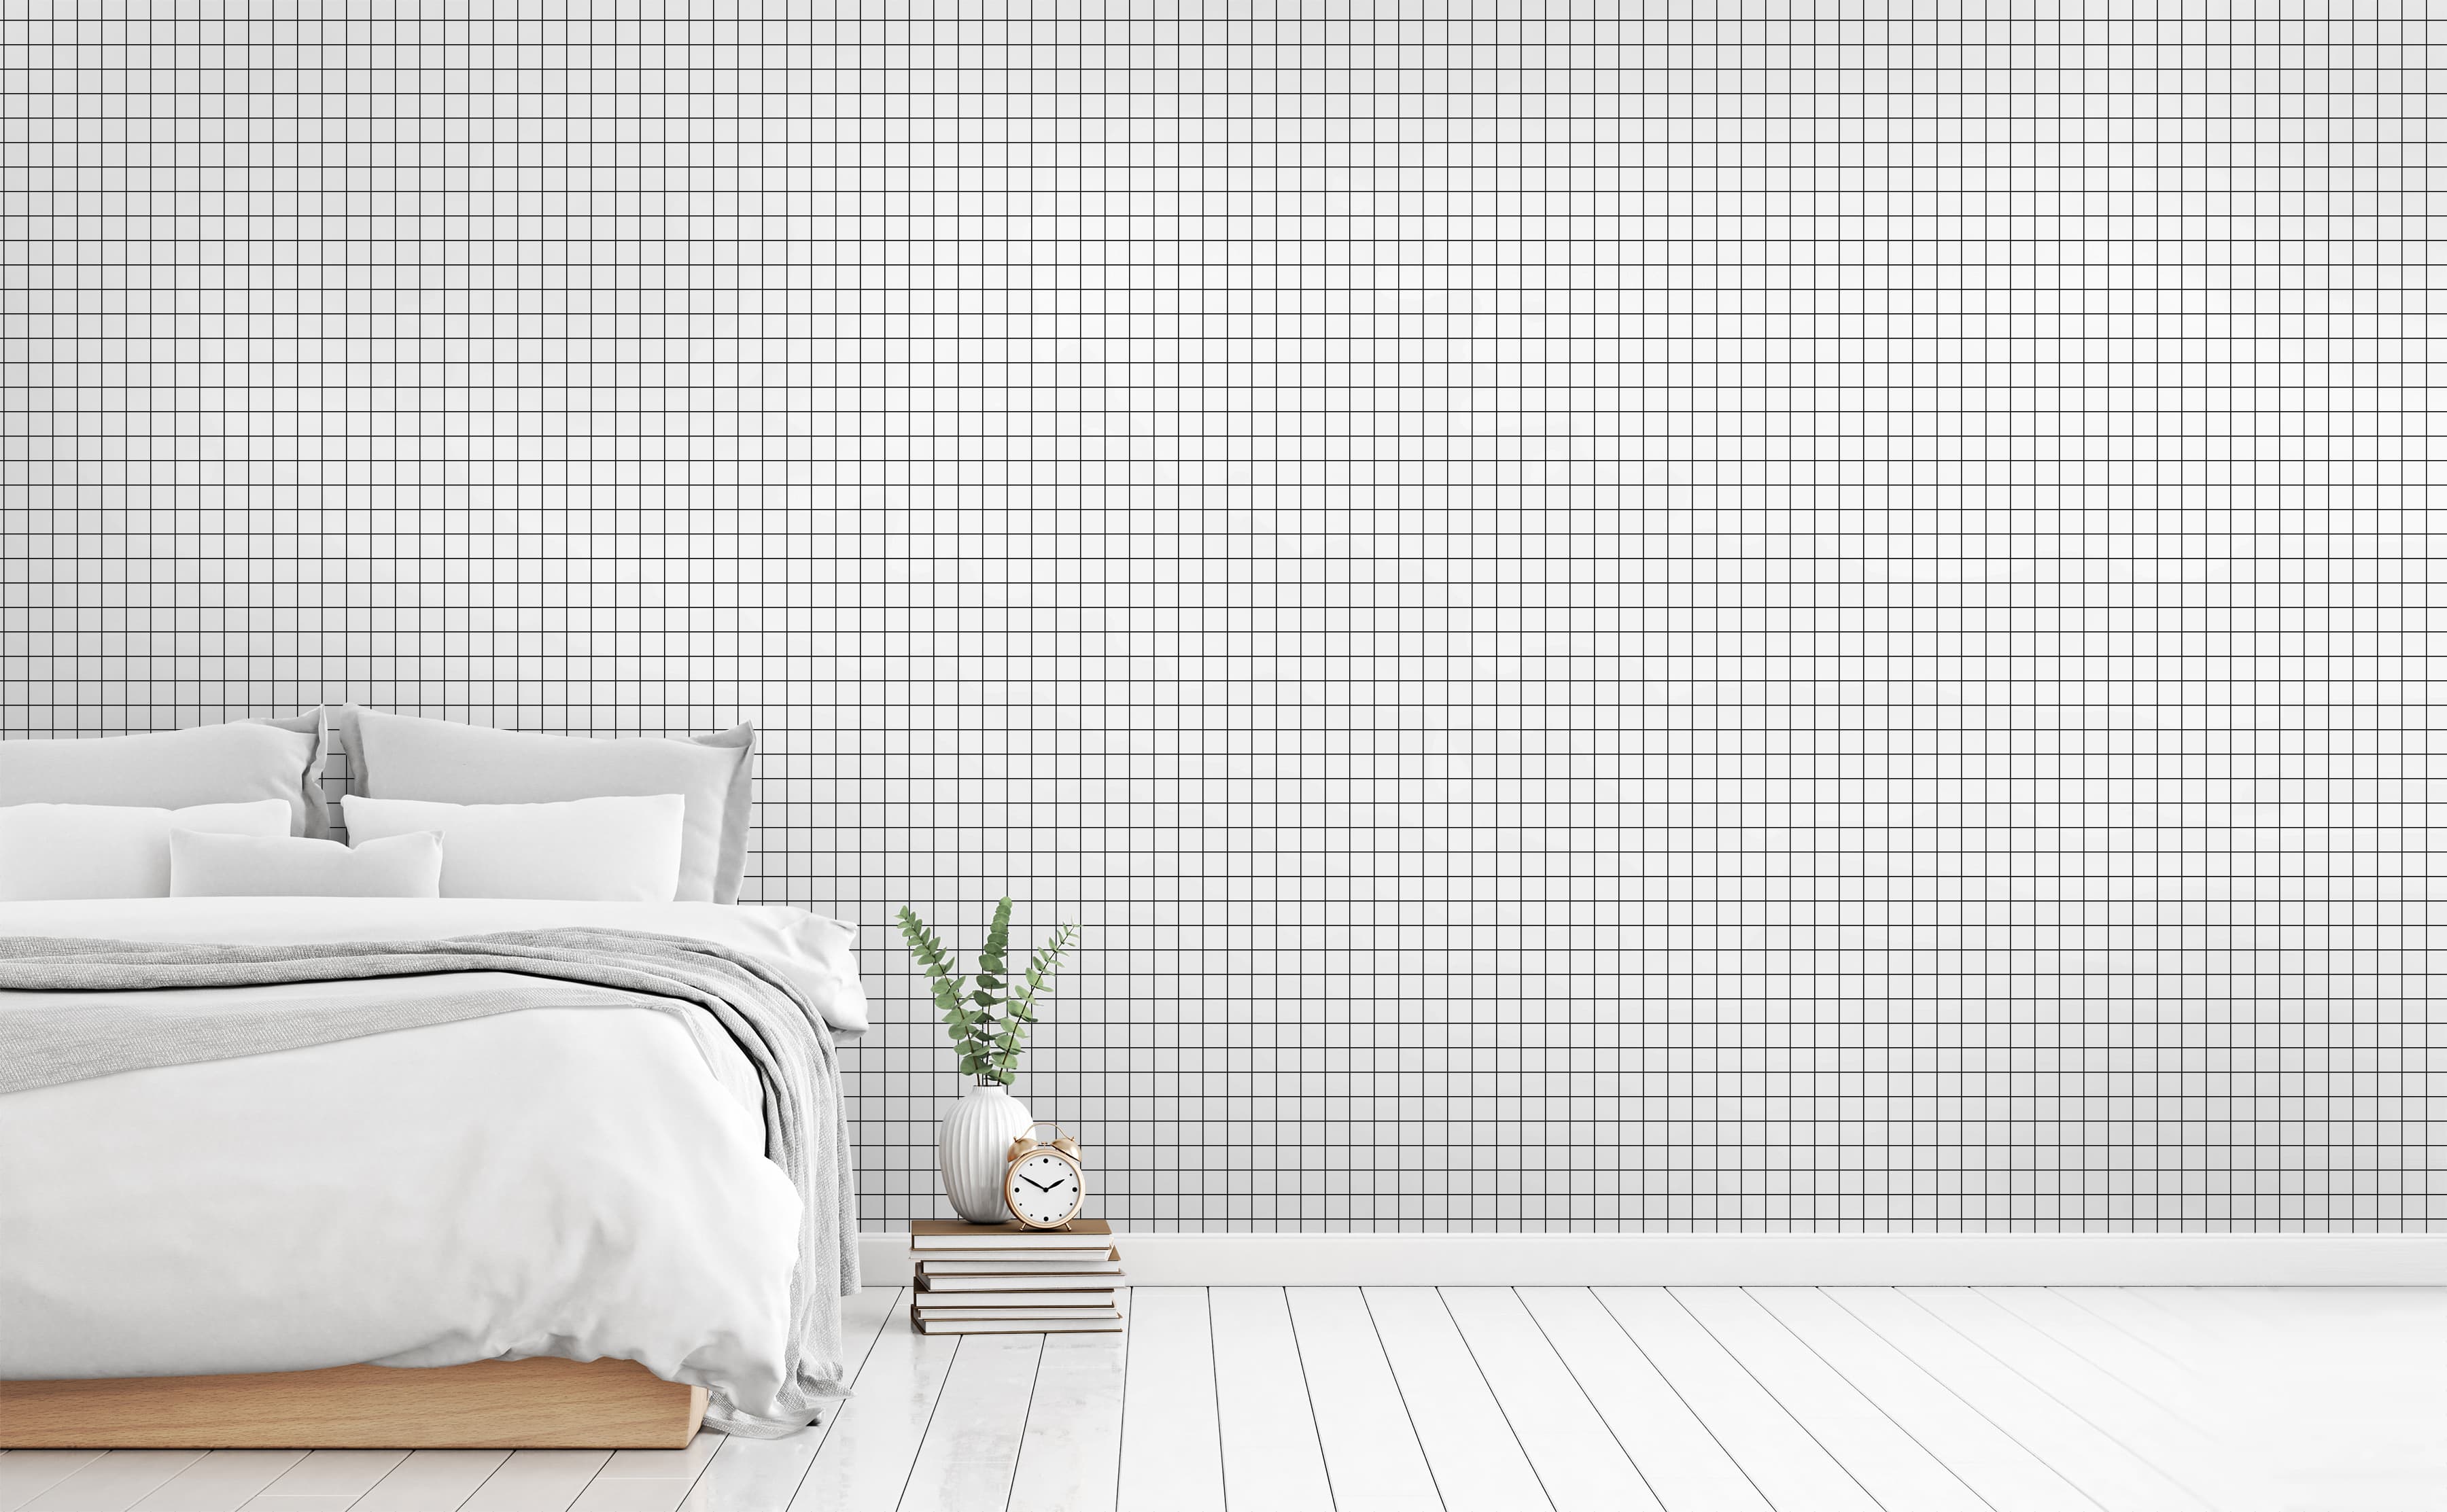 Grid Images  Free Photos PNG Stickers Wallpapers  Backgrounds  rawpixel